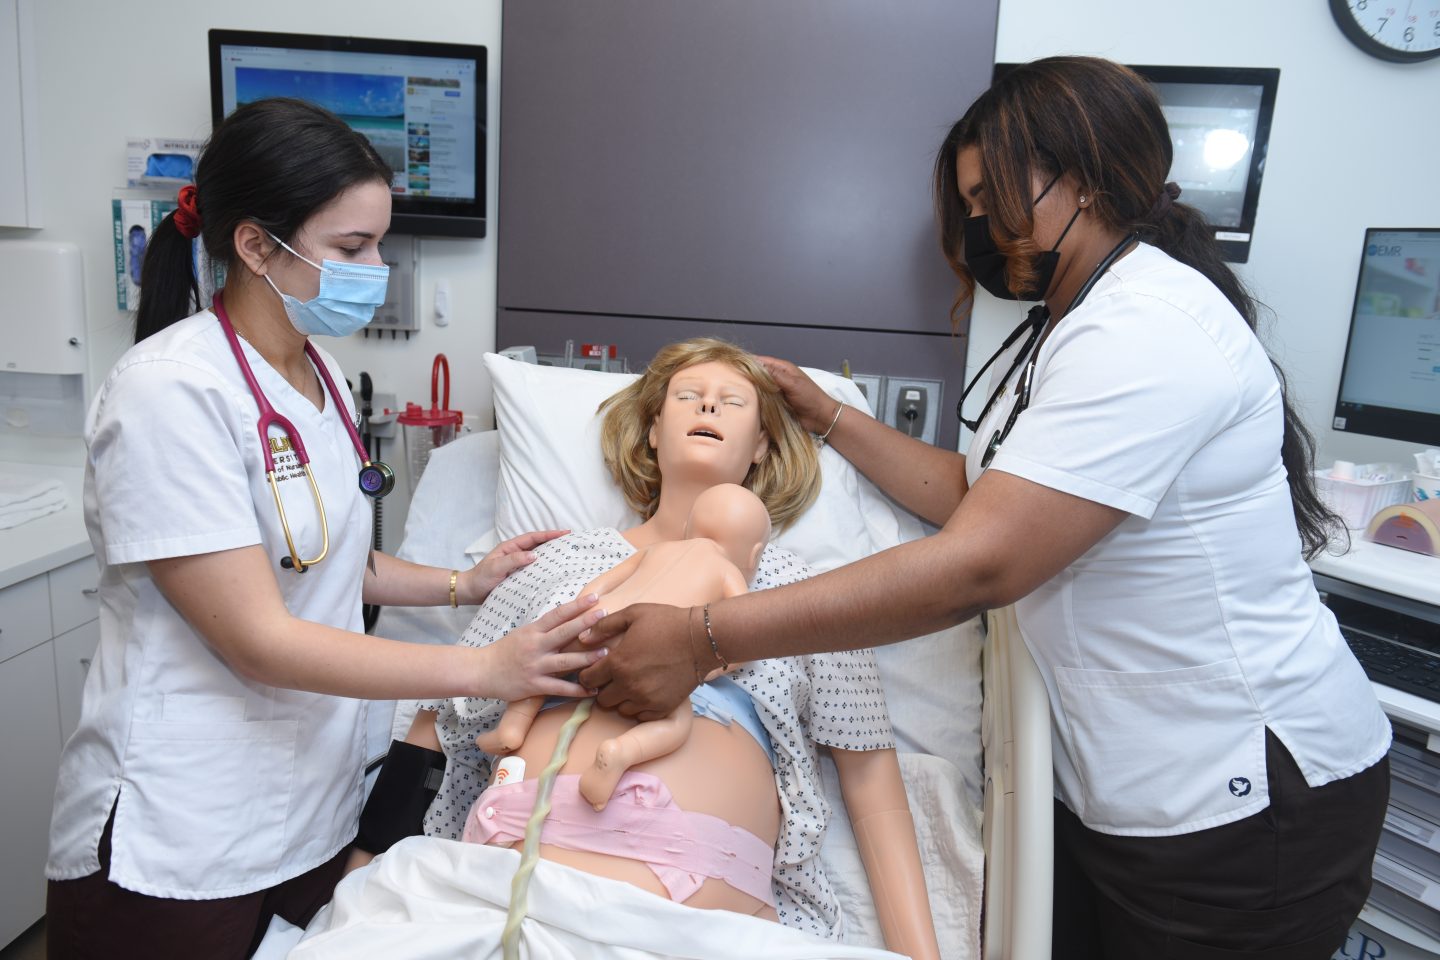 Victoria, a high-fidelity maternal simulator manikin, arrived at CESiL with two baby manikins in March 2019鈥攁ble to simulate a complete range of situations that nurses may face in the delivery room, from typical neonatal care to obstetric emergencies.